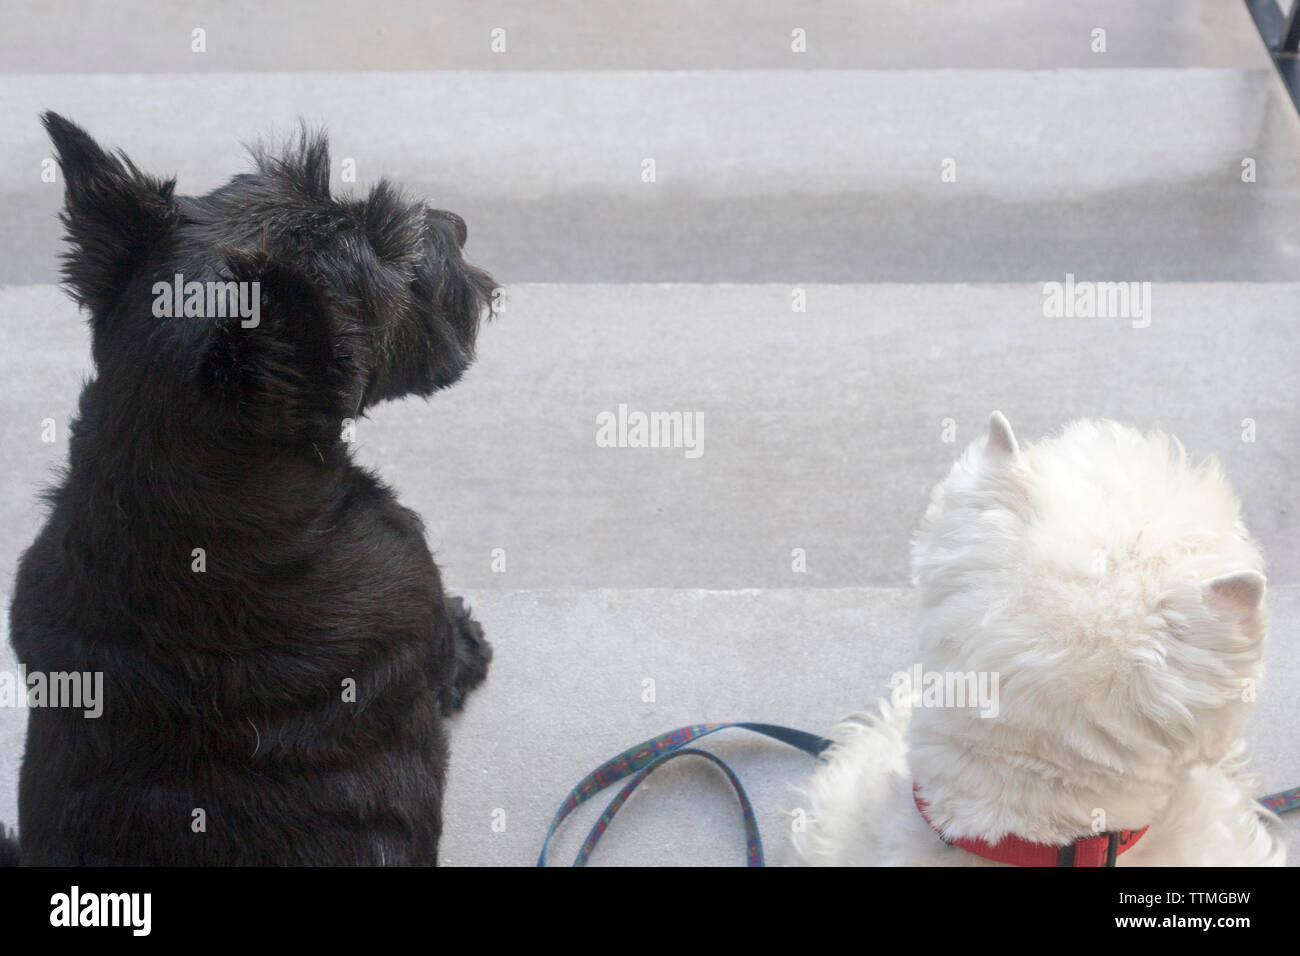 Adult female black Scottish Terrier (Scottie) dog and adult male West Highland White Terrier (Westie) sitting on front steps. Photographed from above. Stock Photo